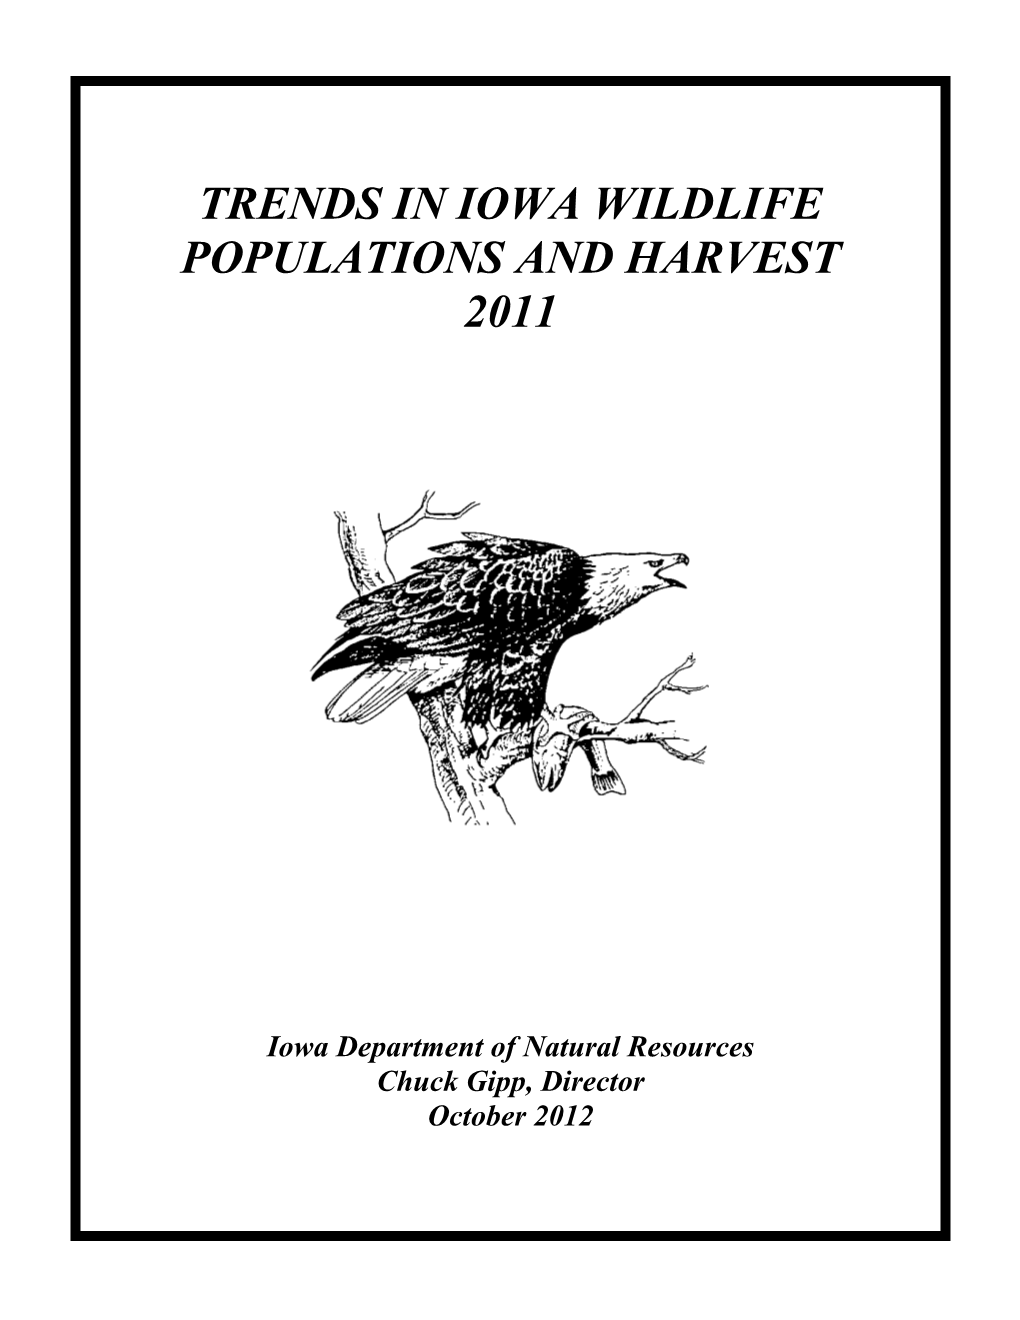 Trends in Iowa Wildlife Populations and Harvest 2011